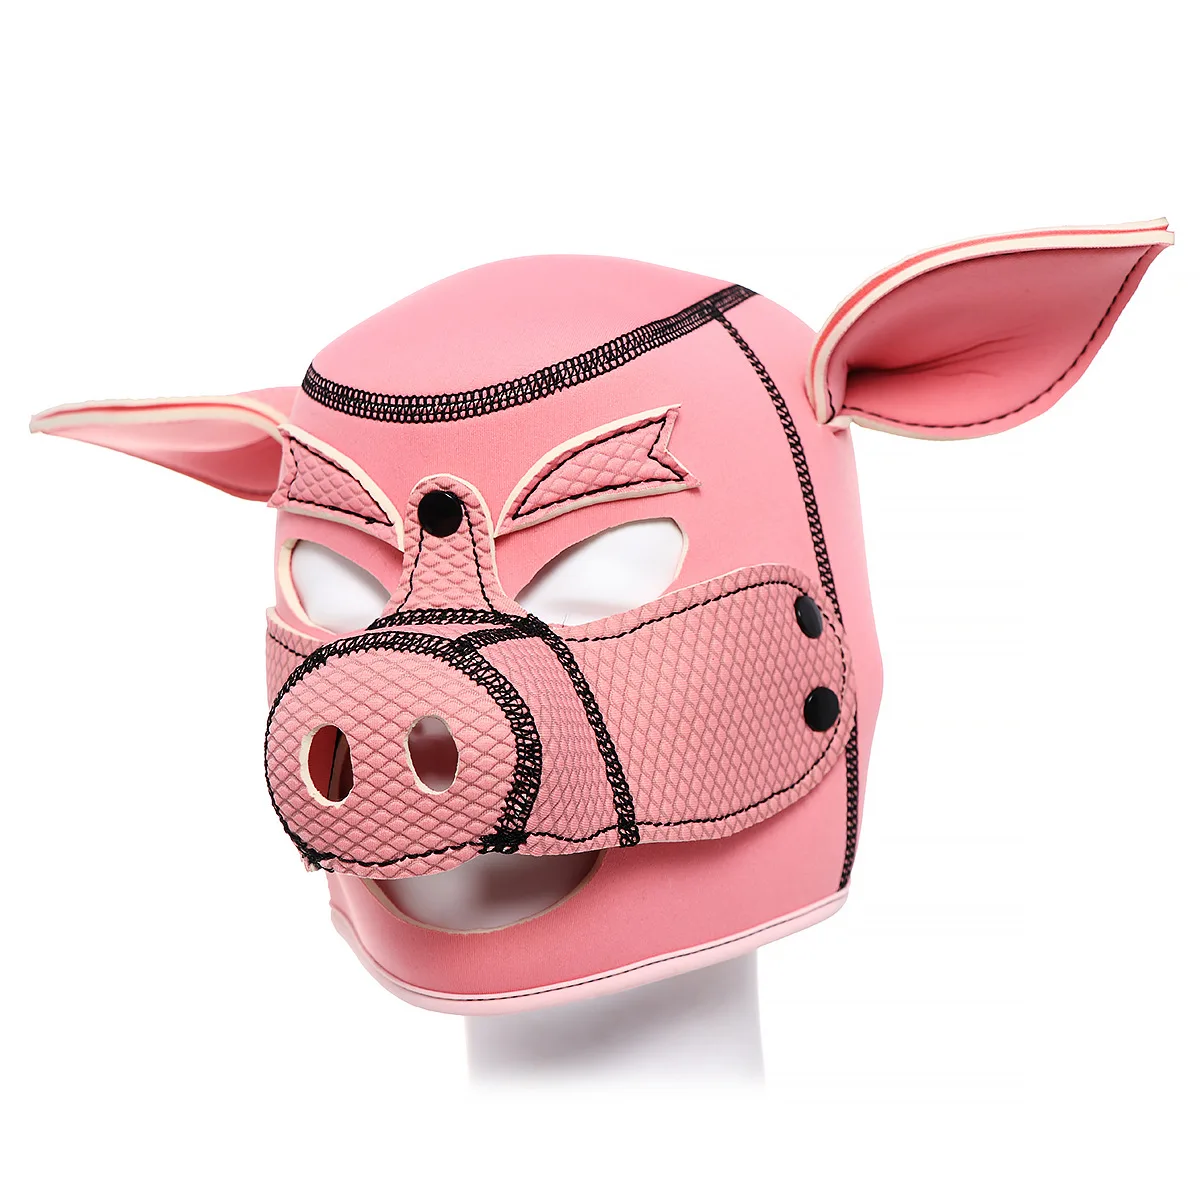 

Neoprene Piggy Play Headgear Pink Pig Hood Mask Slave Full Head Bondage With Ears Party Sex Mask Pet RolePlay Couple Sex Toy